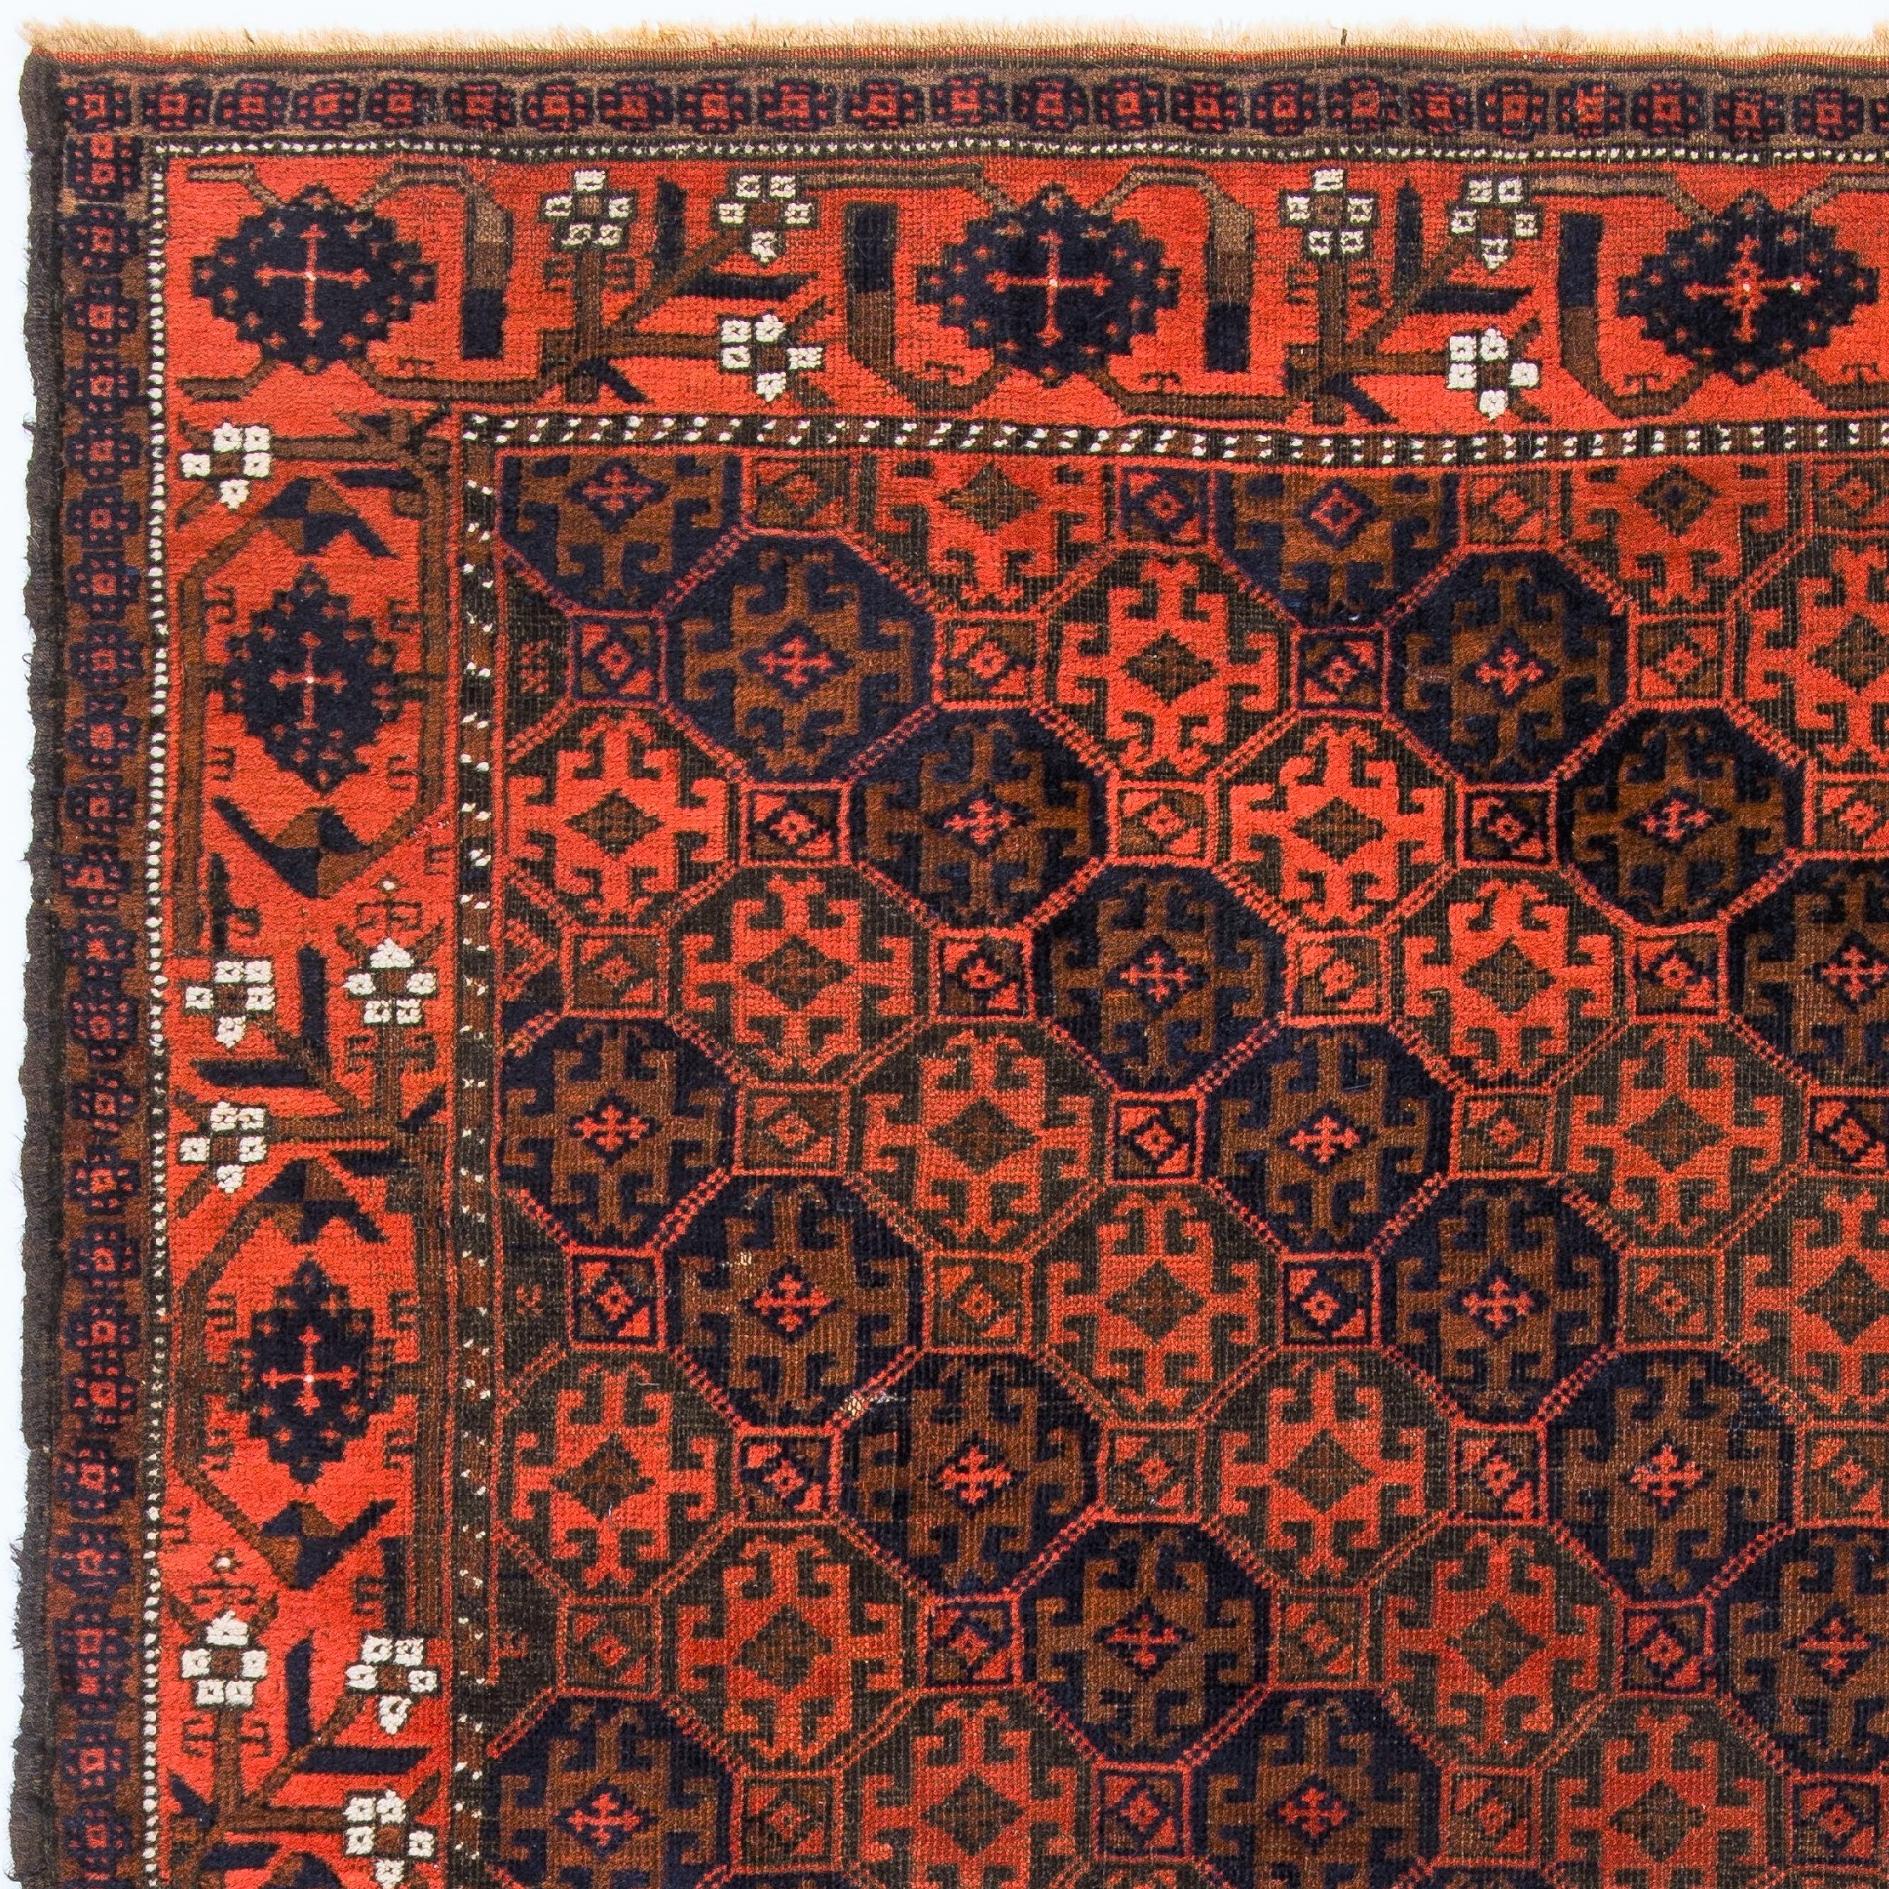 Antique Tribal Baluch rug from Afghanistan, Ca 1880. Finely hand-knotted with even medium wool pile on wool foundation. Very good condition. Sturdy and as clean as a brand new rug (deep washed professionally. Measures: 3.4 x 6.2 Ft.